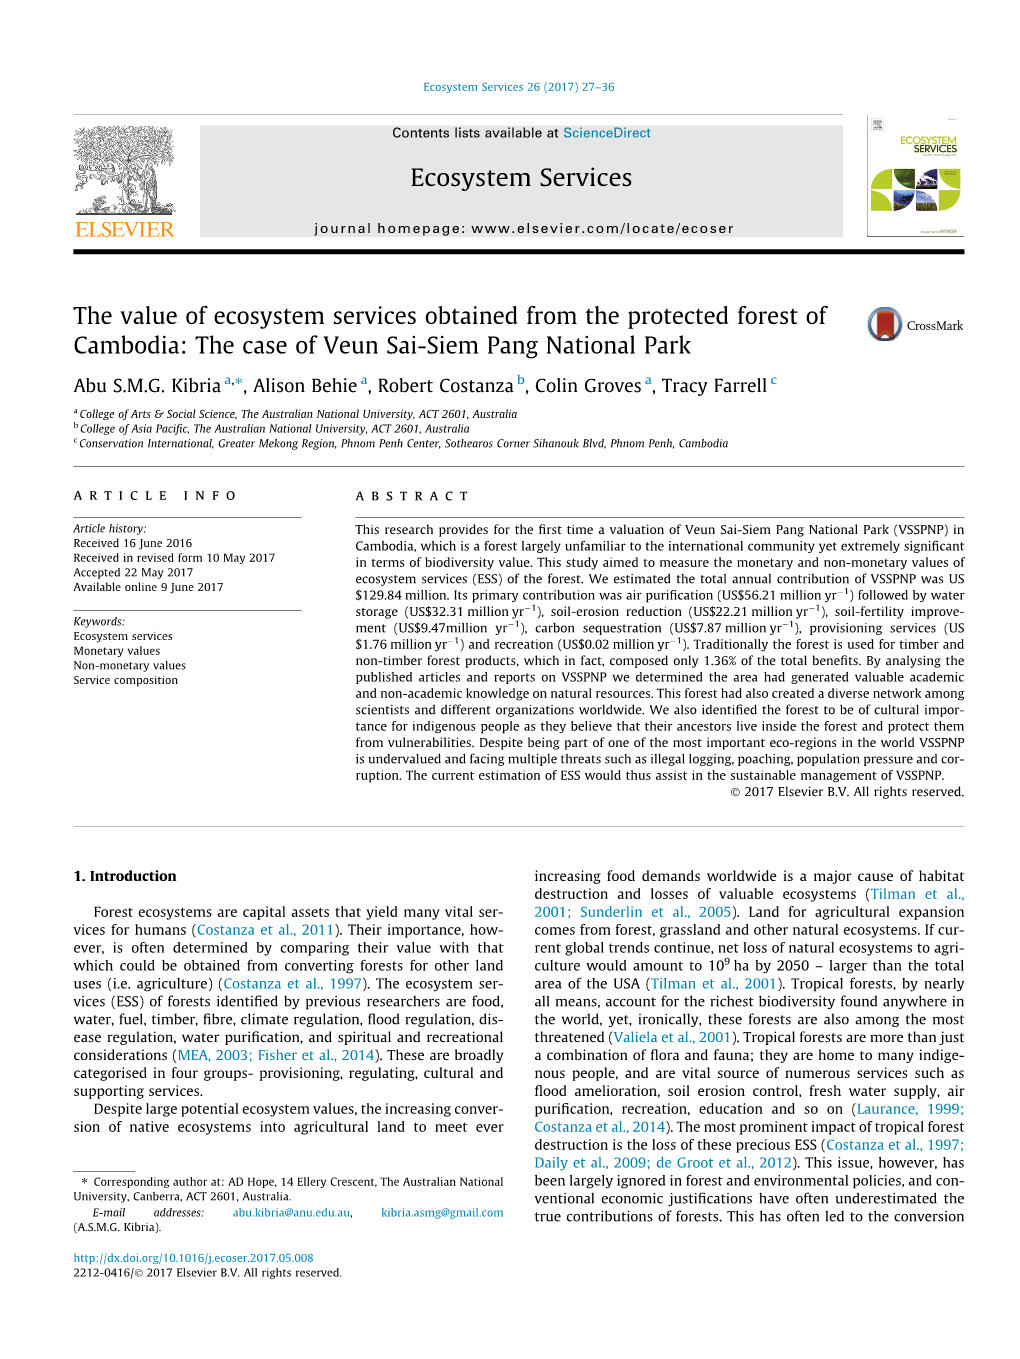 The Value of Ecosystem Services Obtained from the Protected Forest of Cambodia: the Case of Veun Sai-Siem Pang National Park ⇑ Abu S.M.G